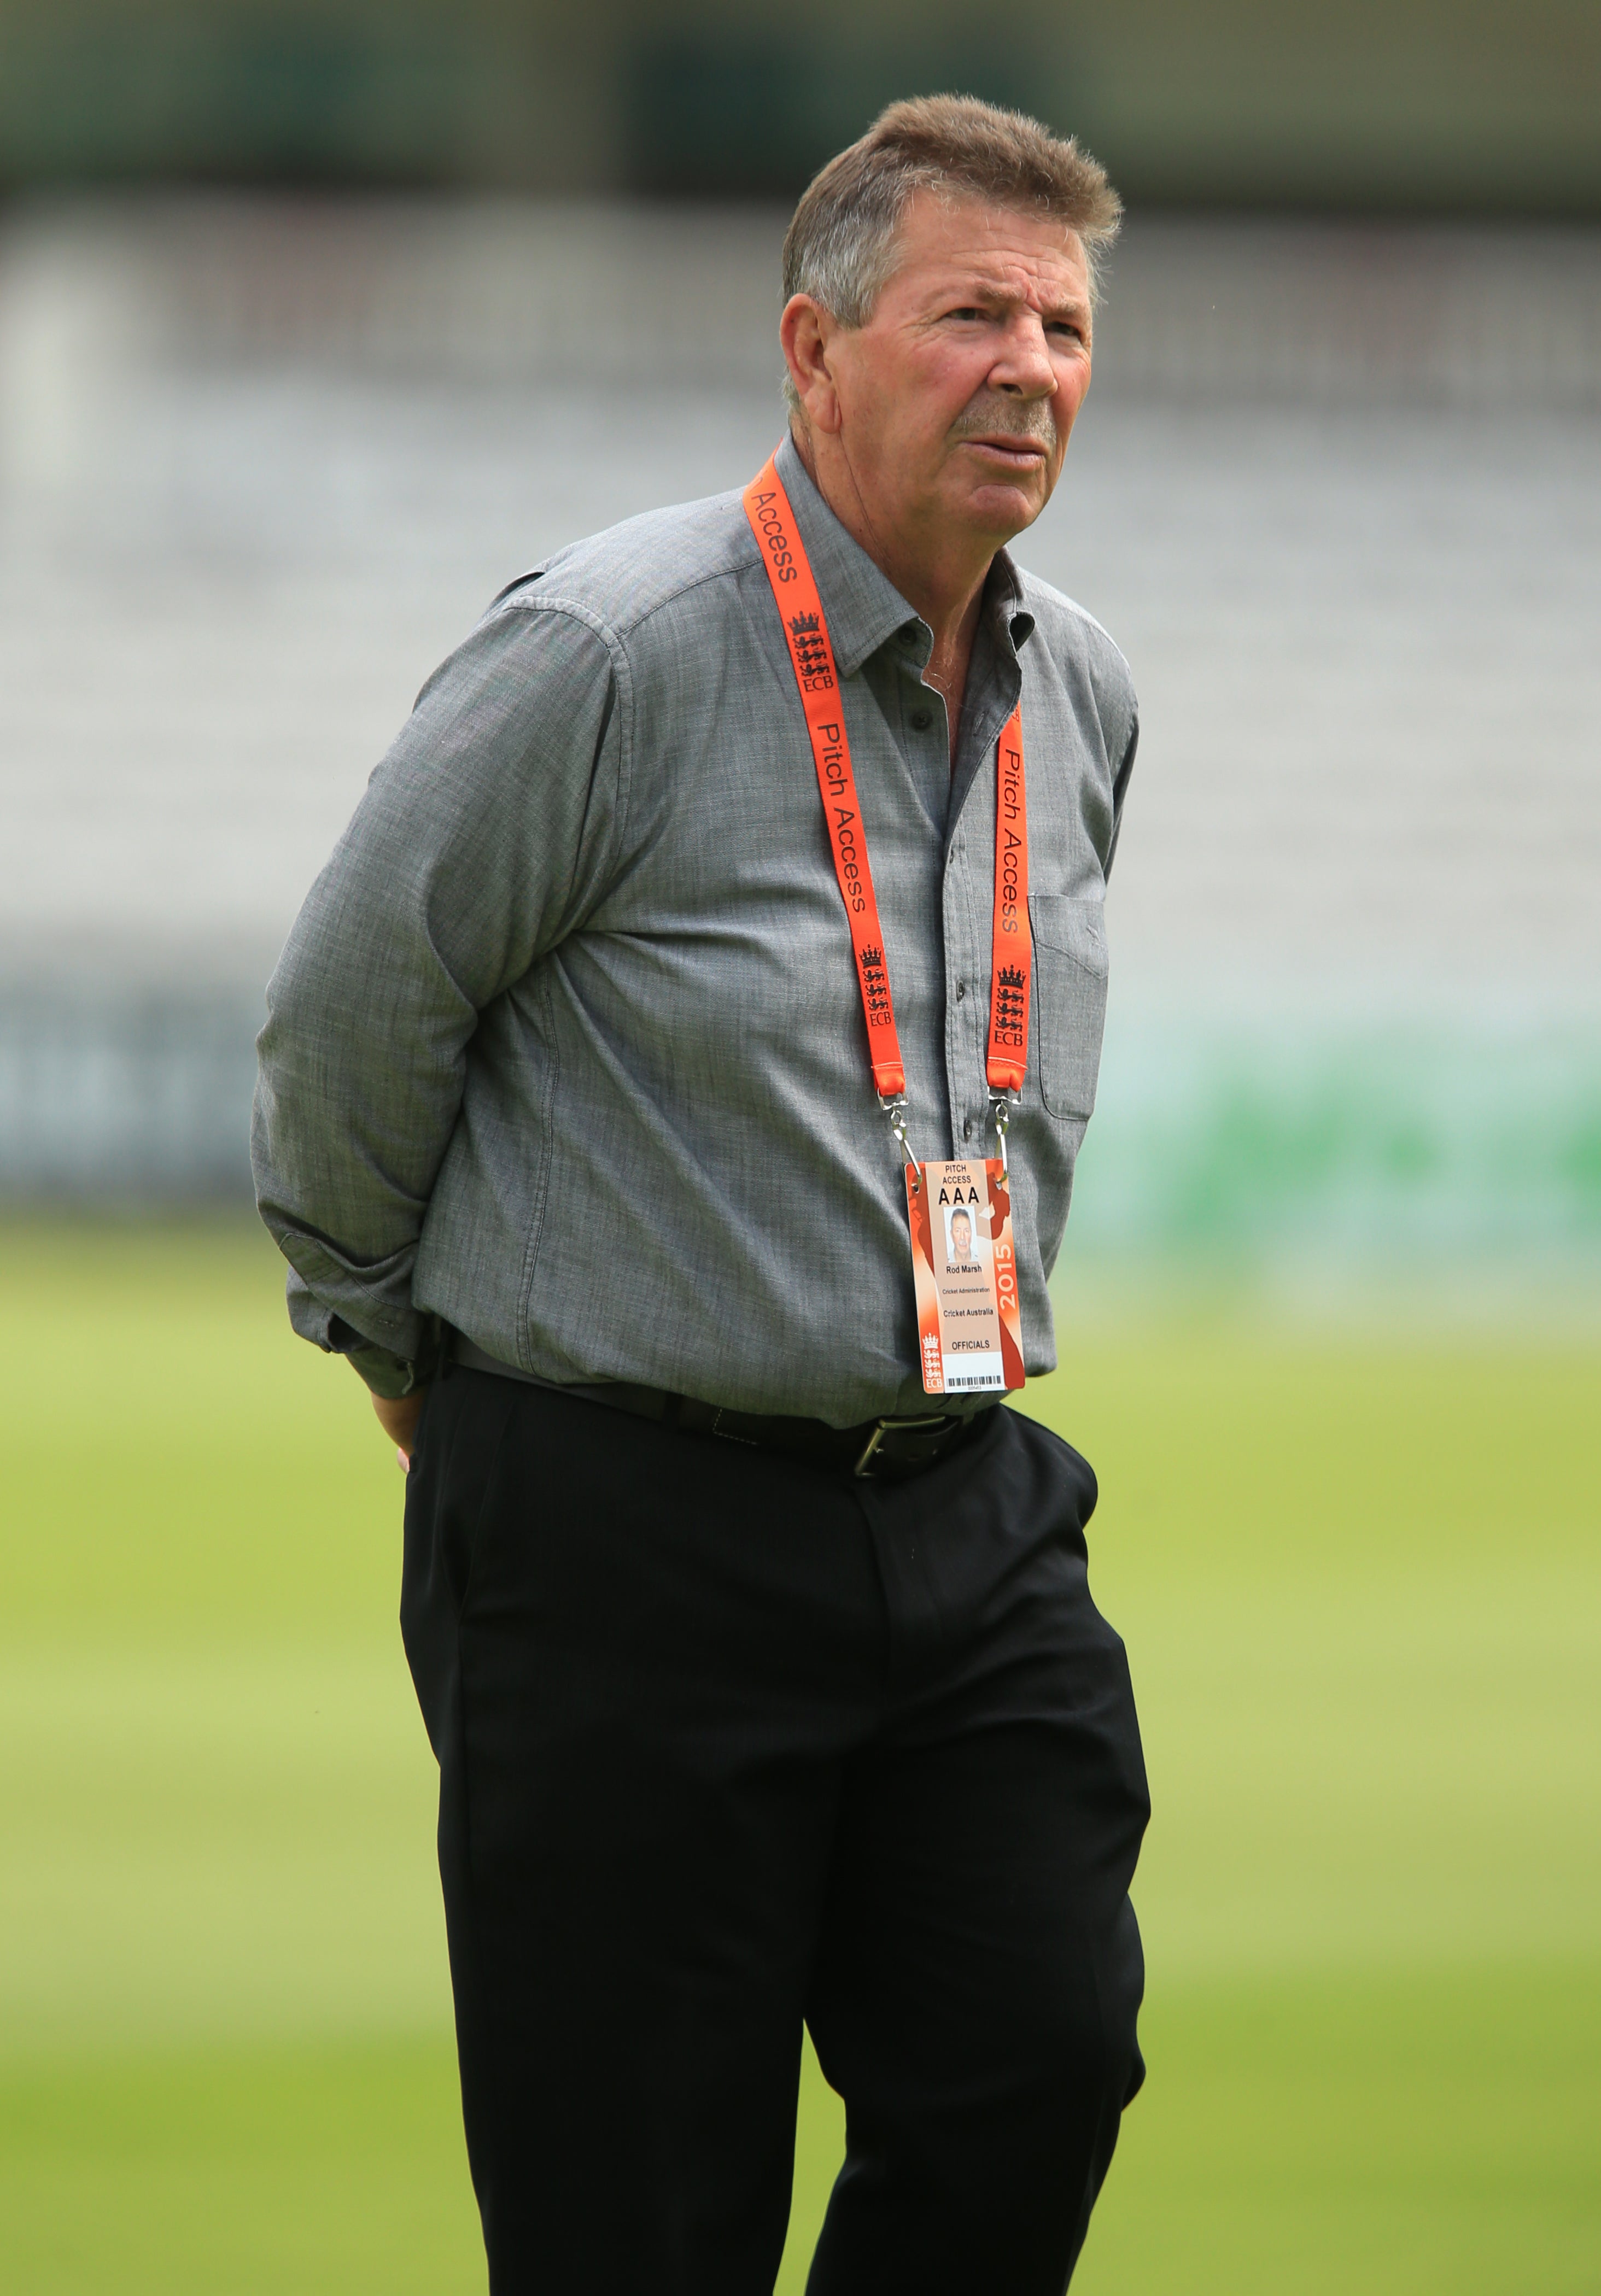 Rod Marsh has died aged 74 (Mike Egerton/PA)